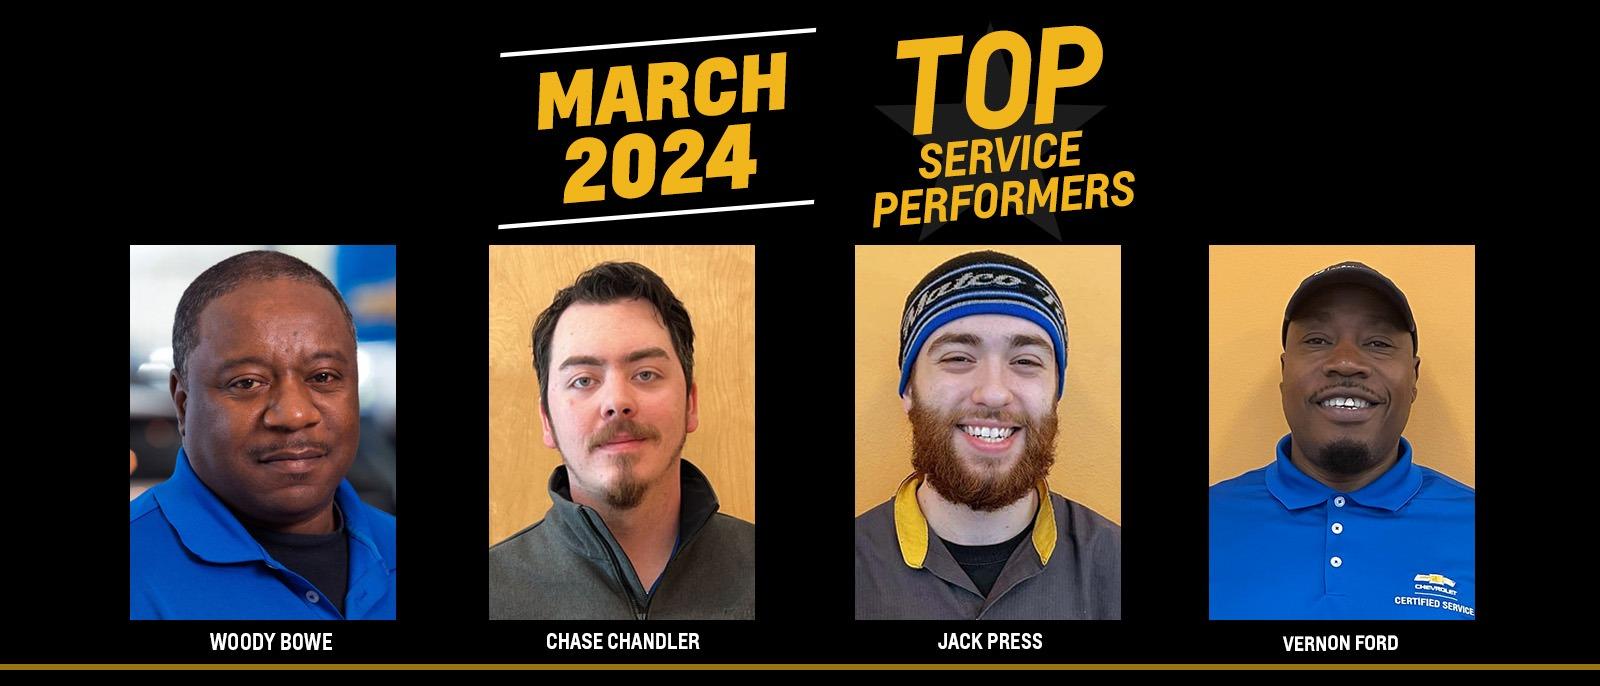 Top Service Performers